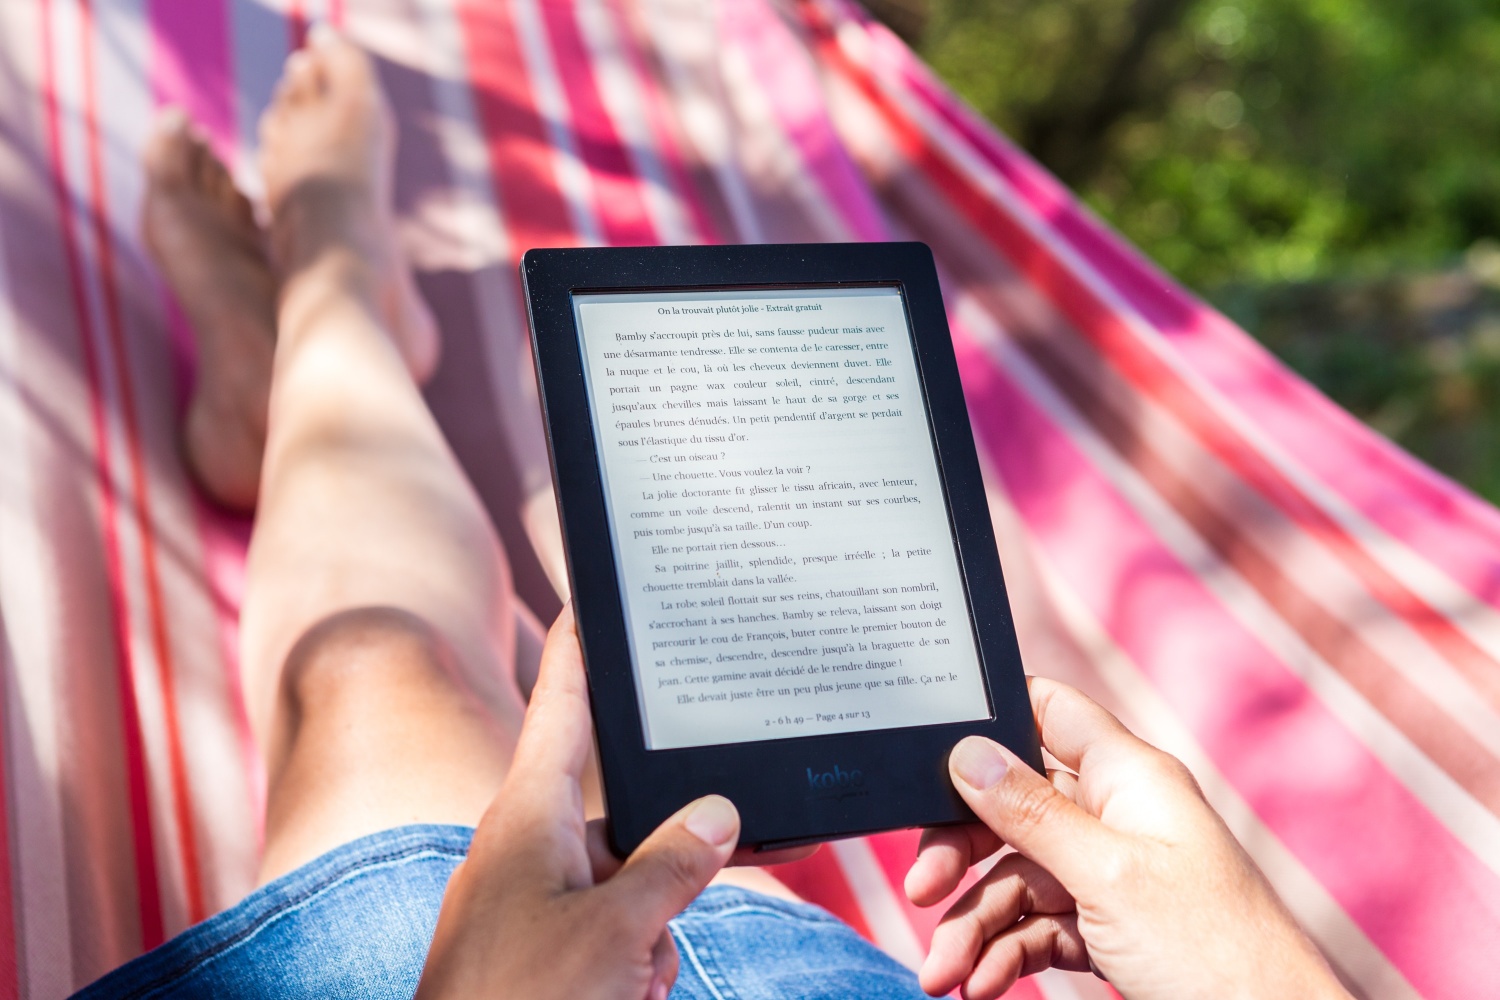 Top 6 Genre Fiction Amazon E-Books That are Perfect for your Me-Time 